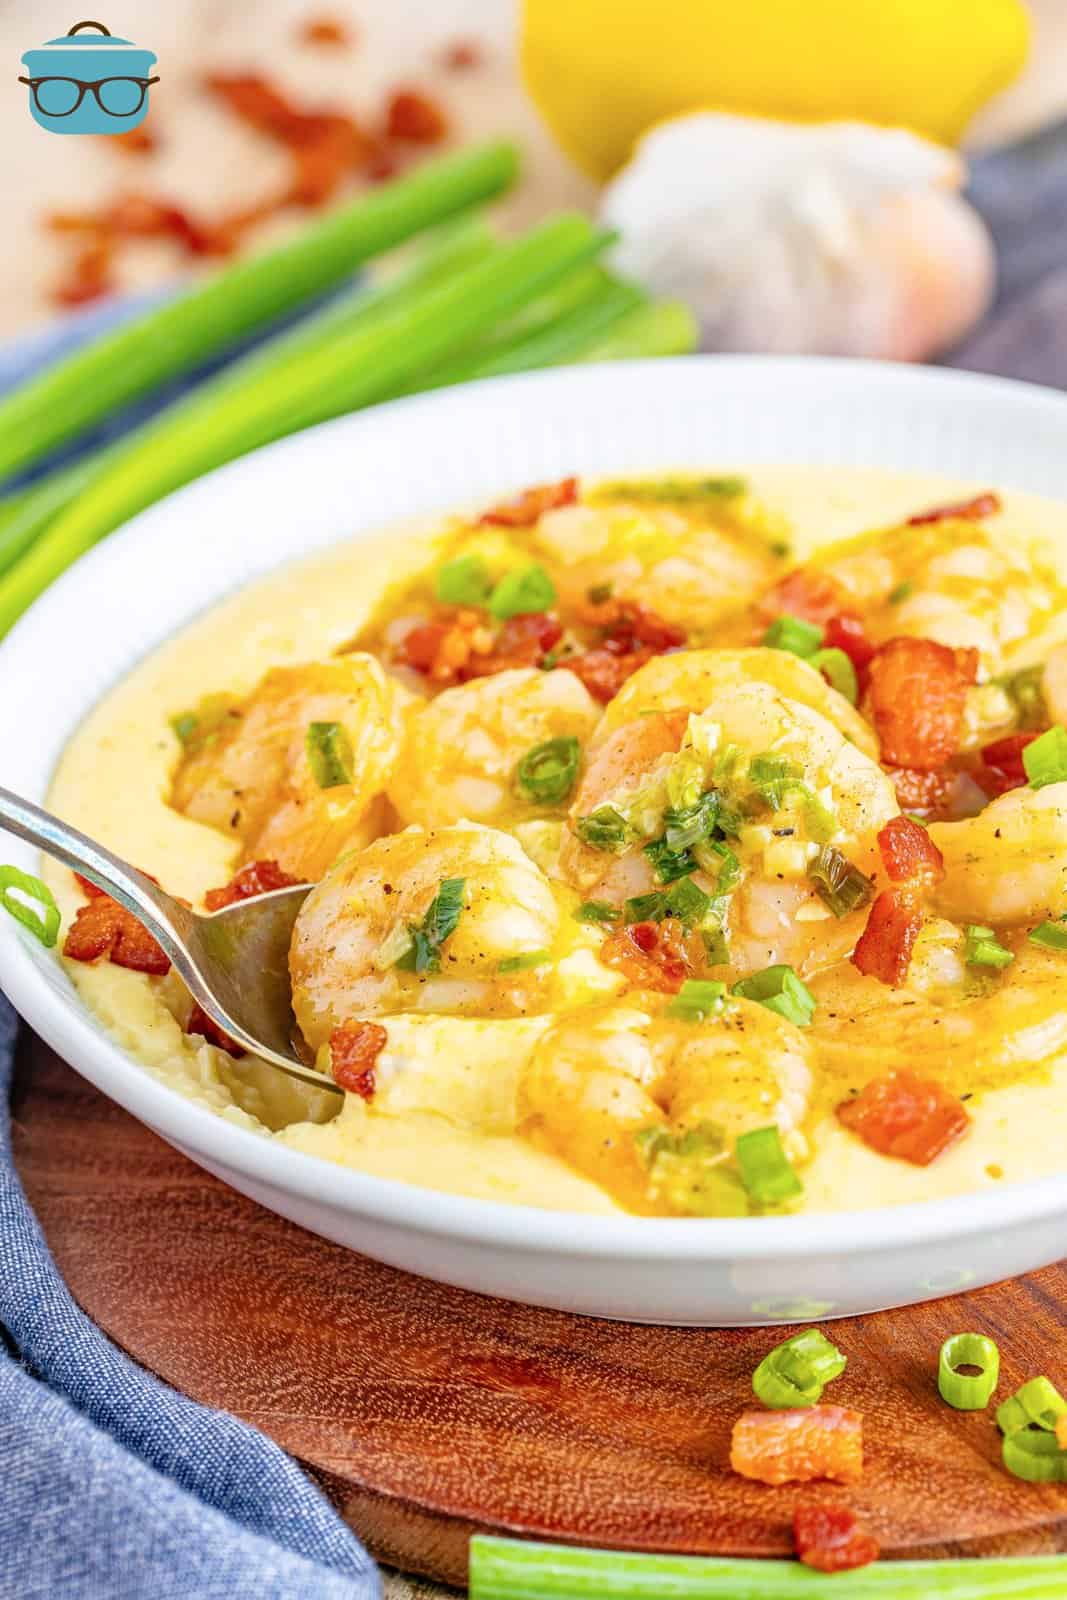 A spoon dipping in a bowl of shrimp and grits.